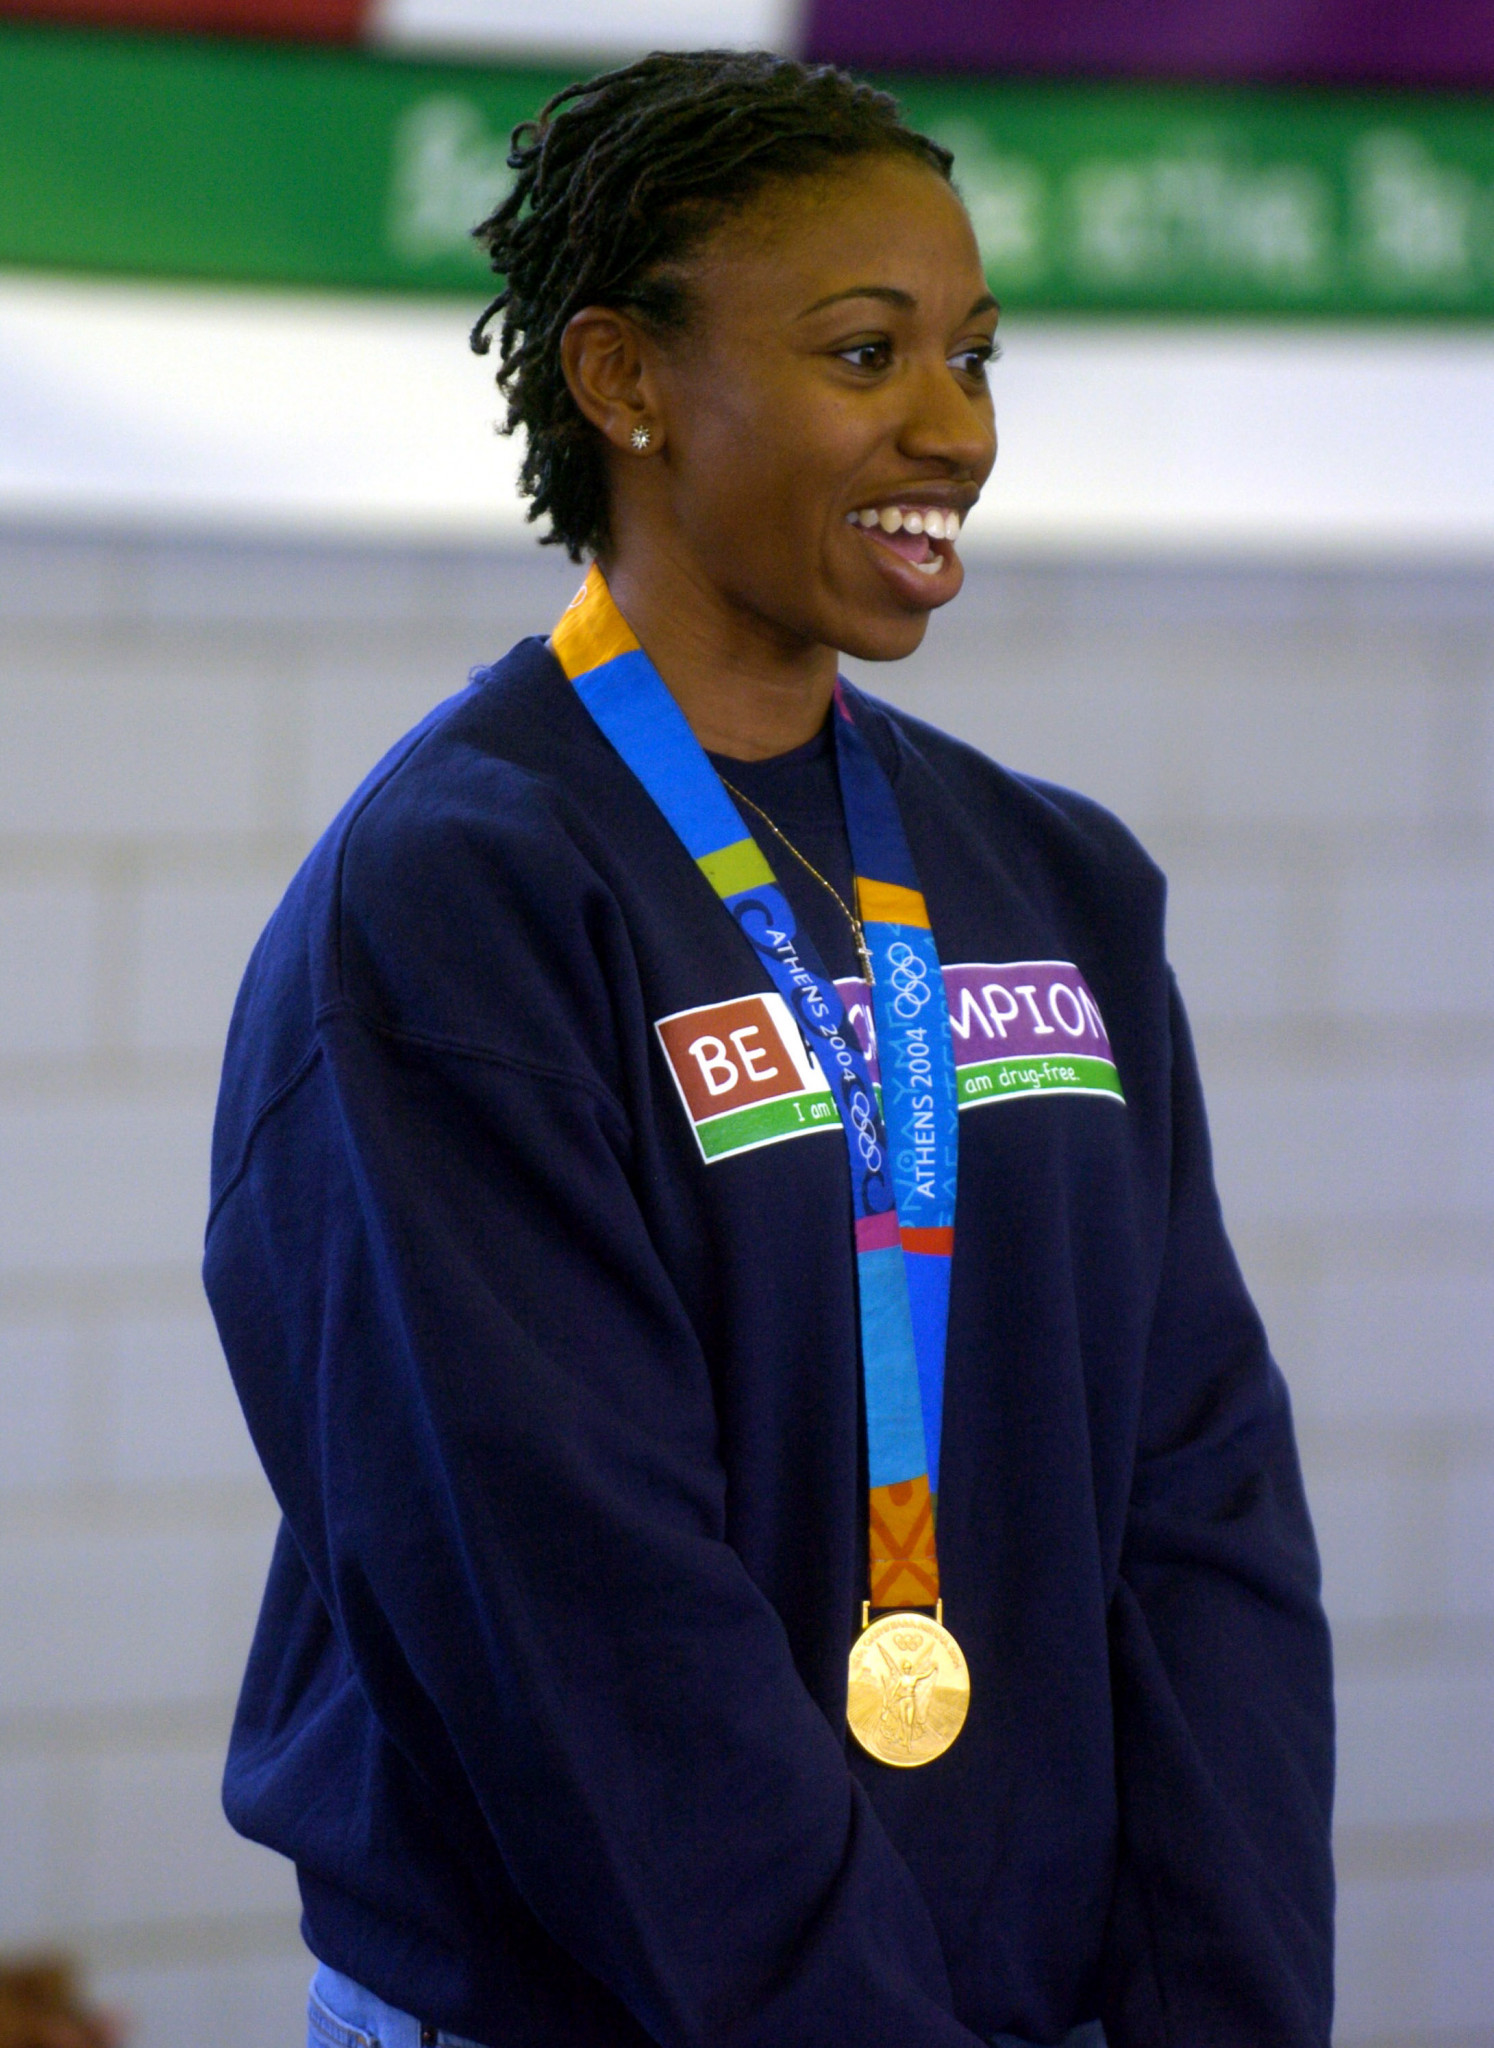 Chairman of the Team USA Council on Racial and Social Justice, Moushaumi Robinson, won a gold medal at Athens 2004 in the women's 4x400 metres relay ©Getty Images